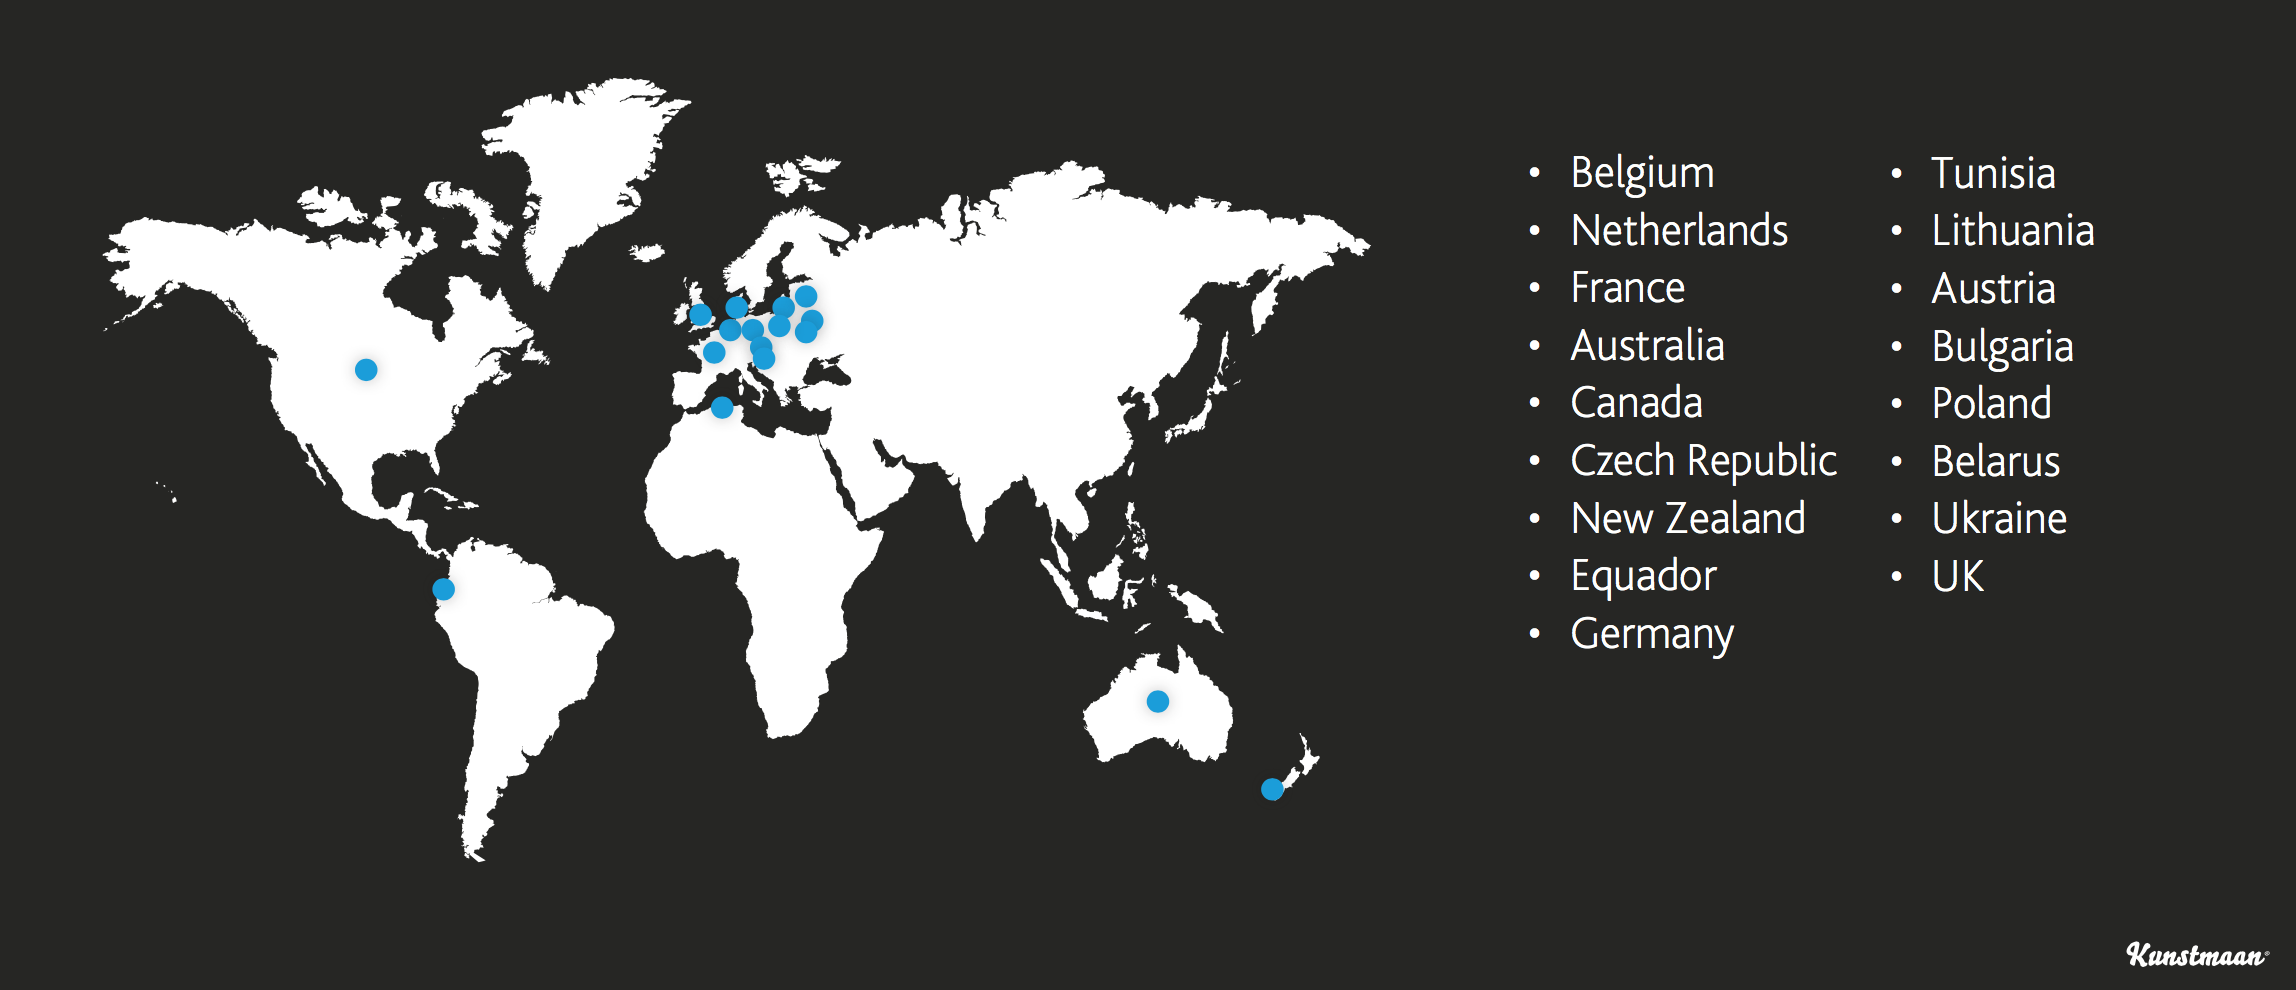 Countries where developers use the Kunstmaan CMS